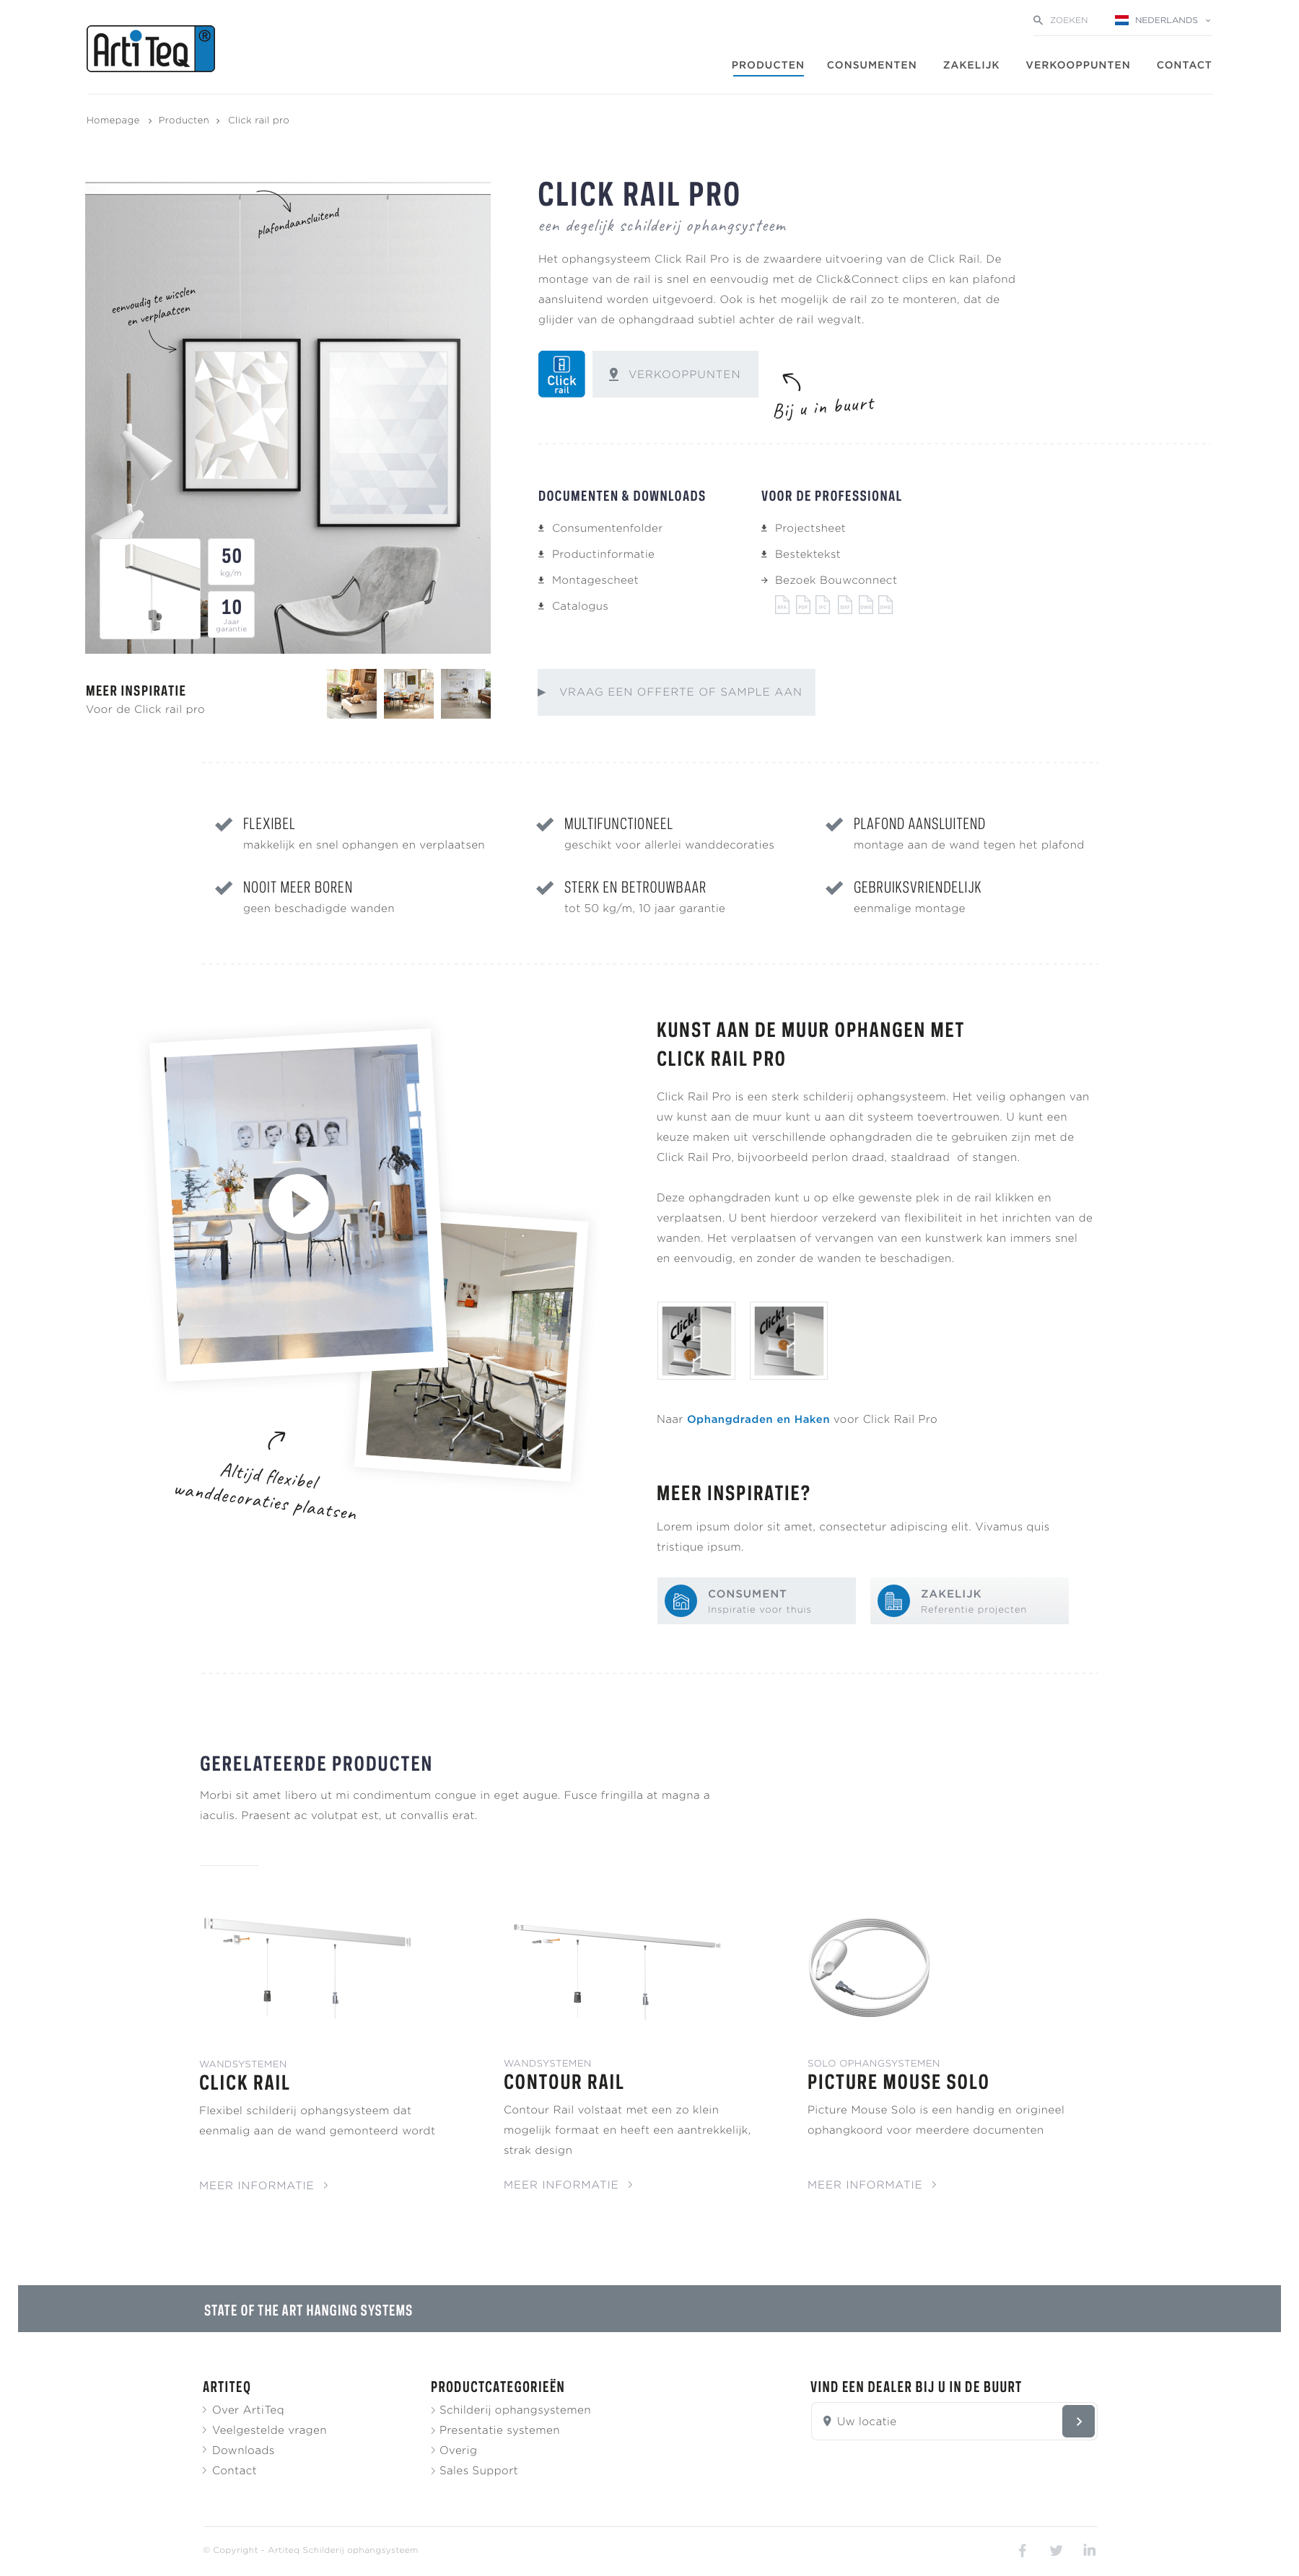 Artiteq productpage